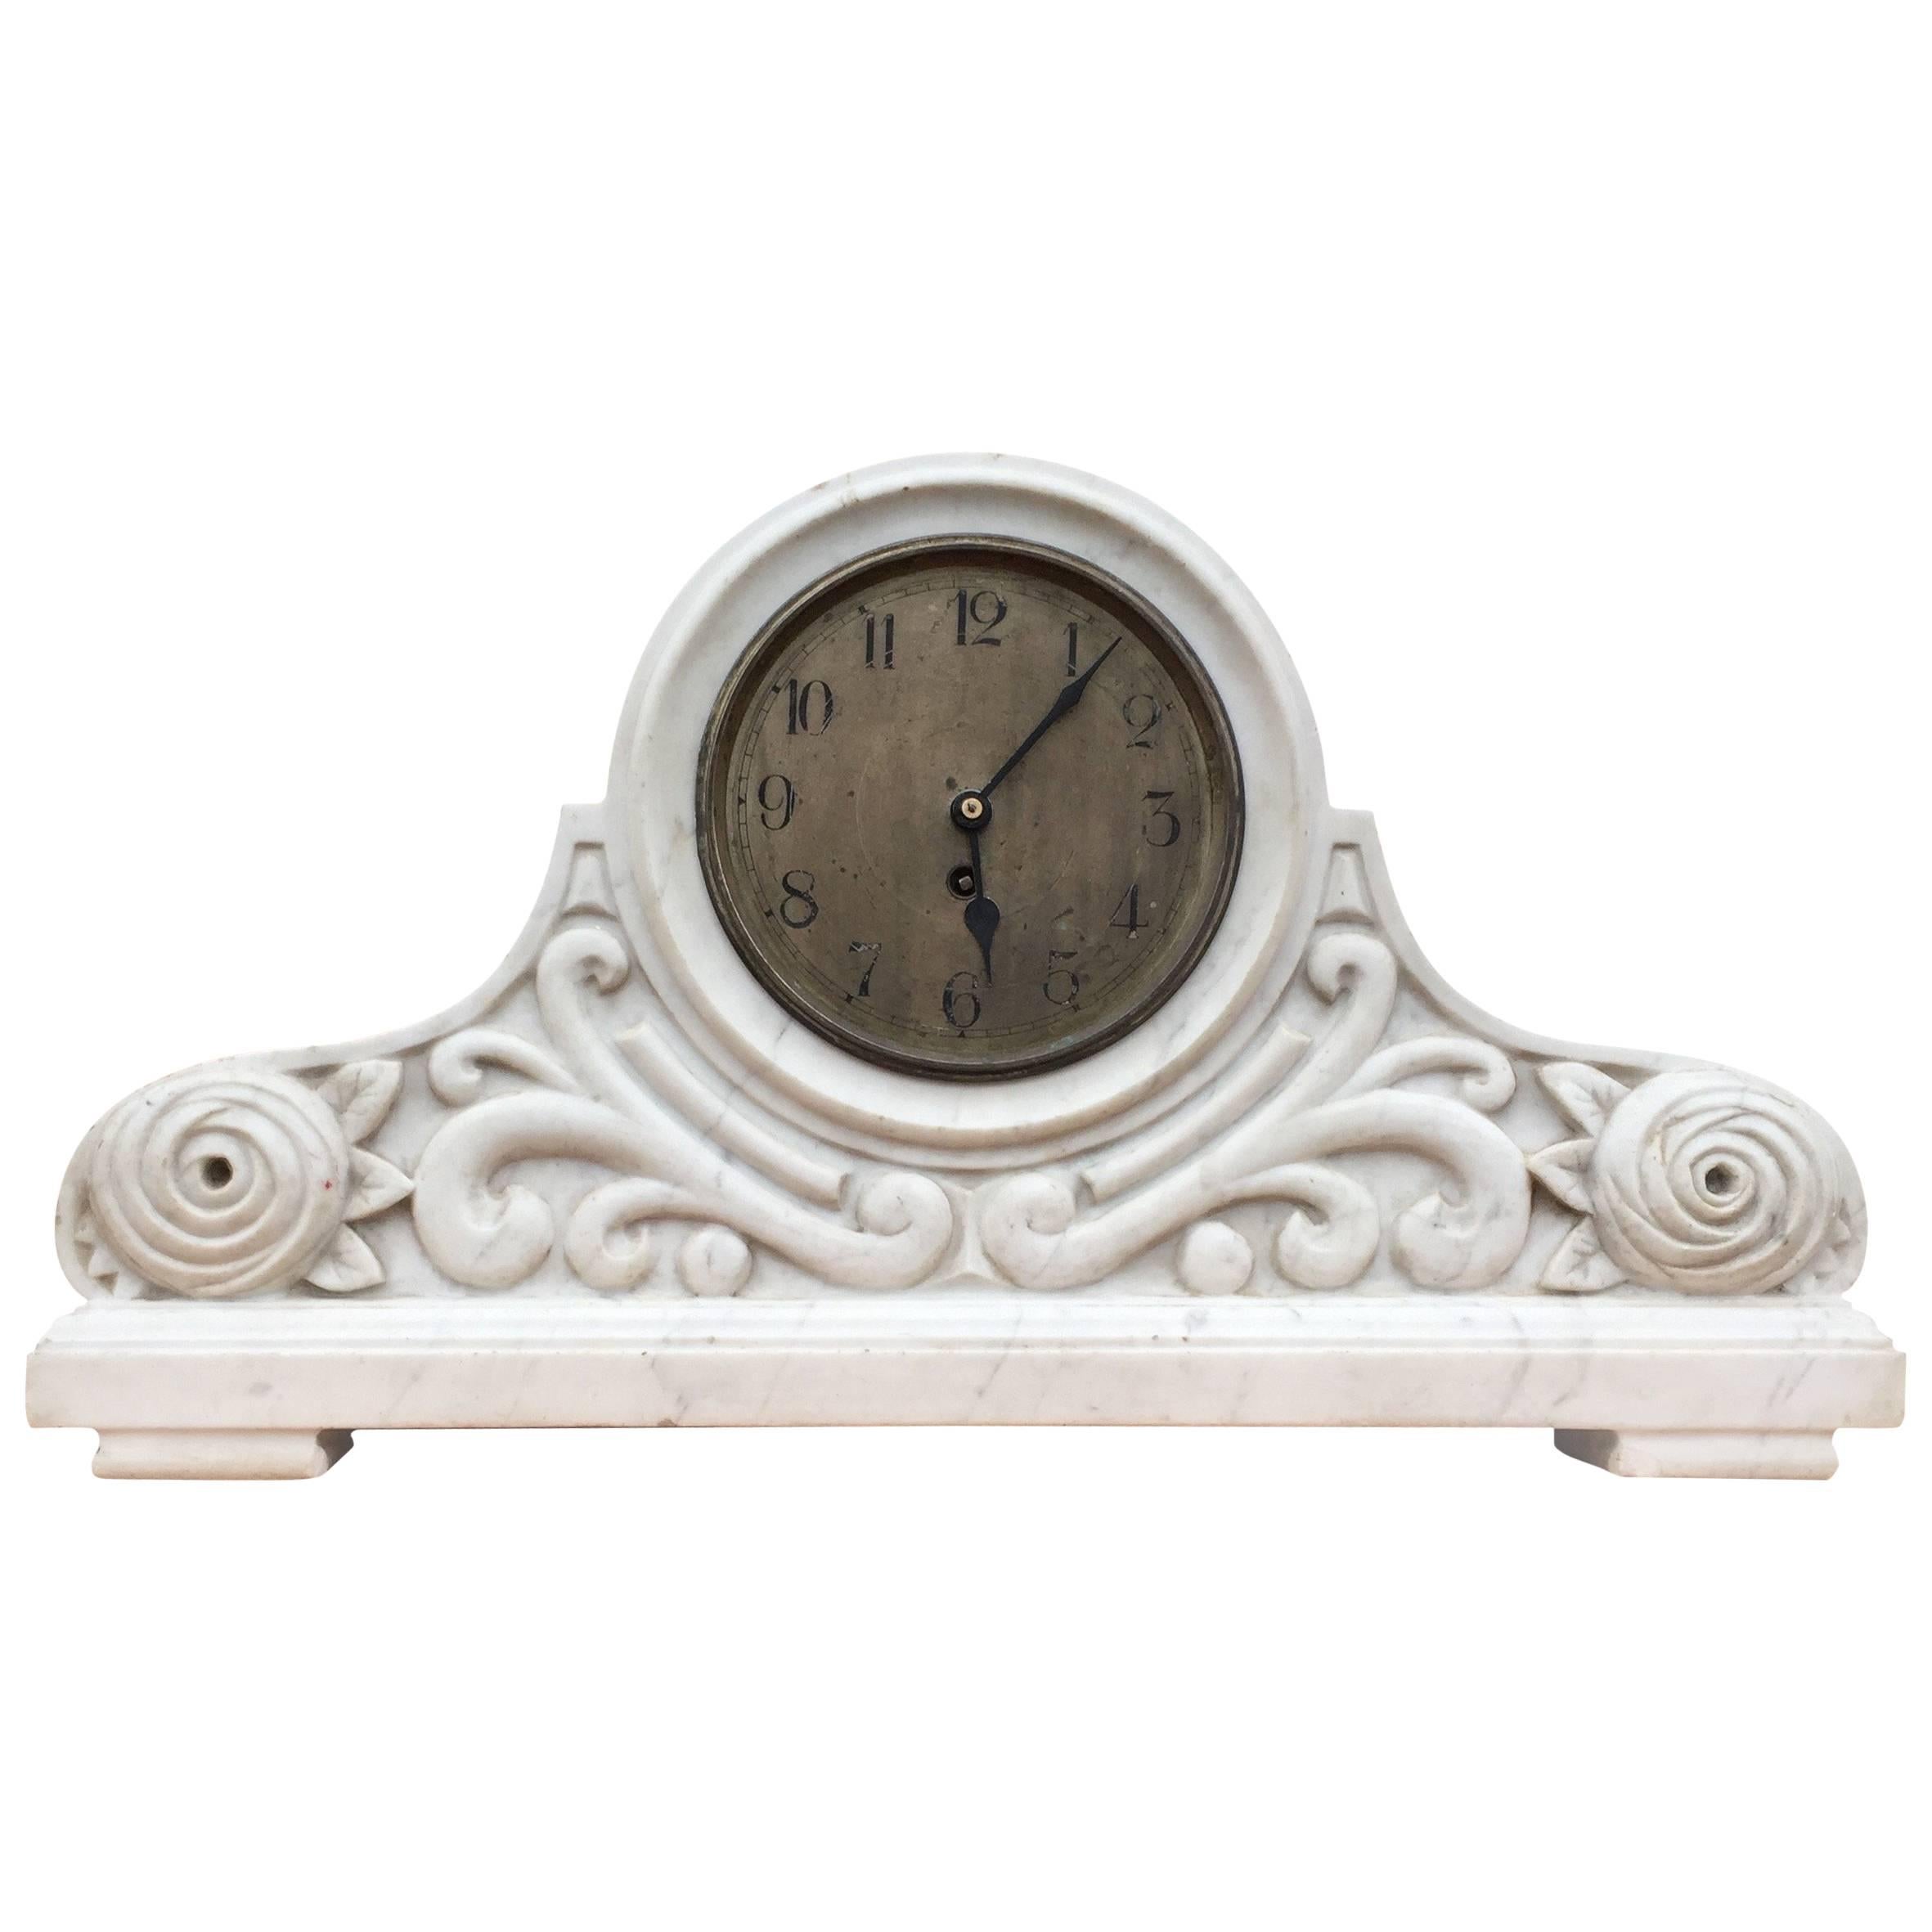 Unique and good size, hand carved solid marble mantel clock.

This beautiful and hand-carved timepiece is a rare find and the look and feel is extraordinary. You will only very rarely come across a hand-carved body like this and the white marble